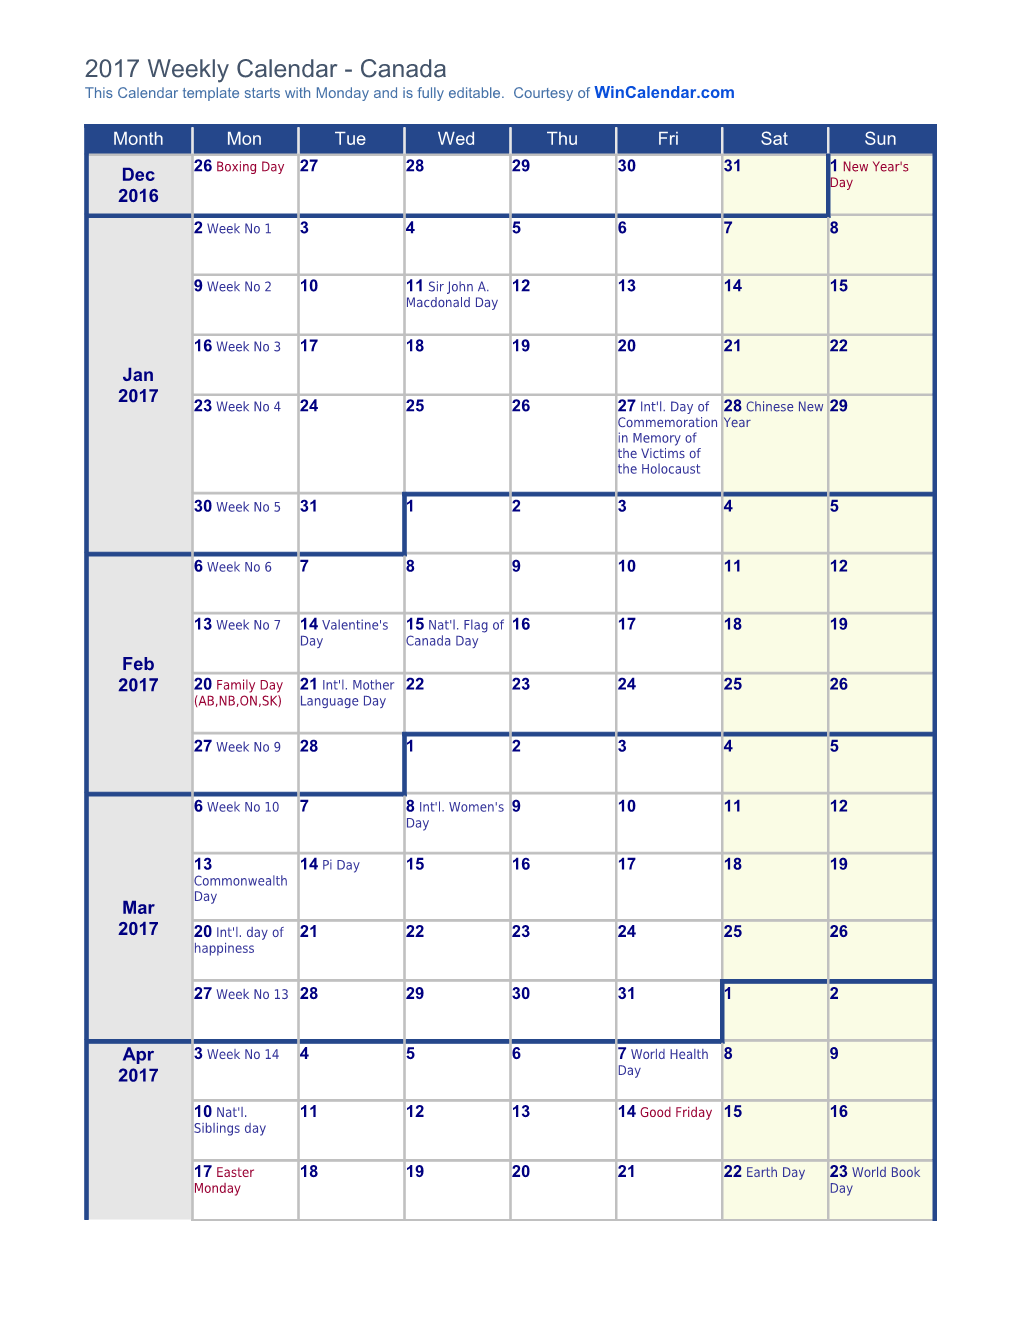 Weekly Calendar 2017 with Festive and National Holidays Canada